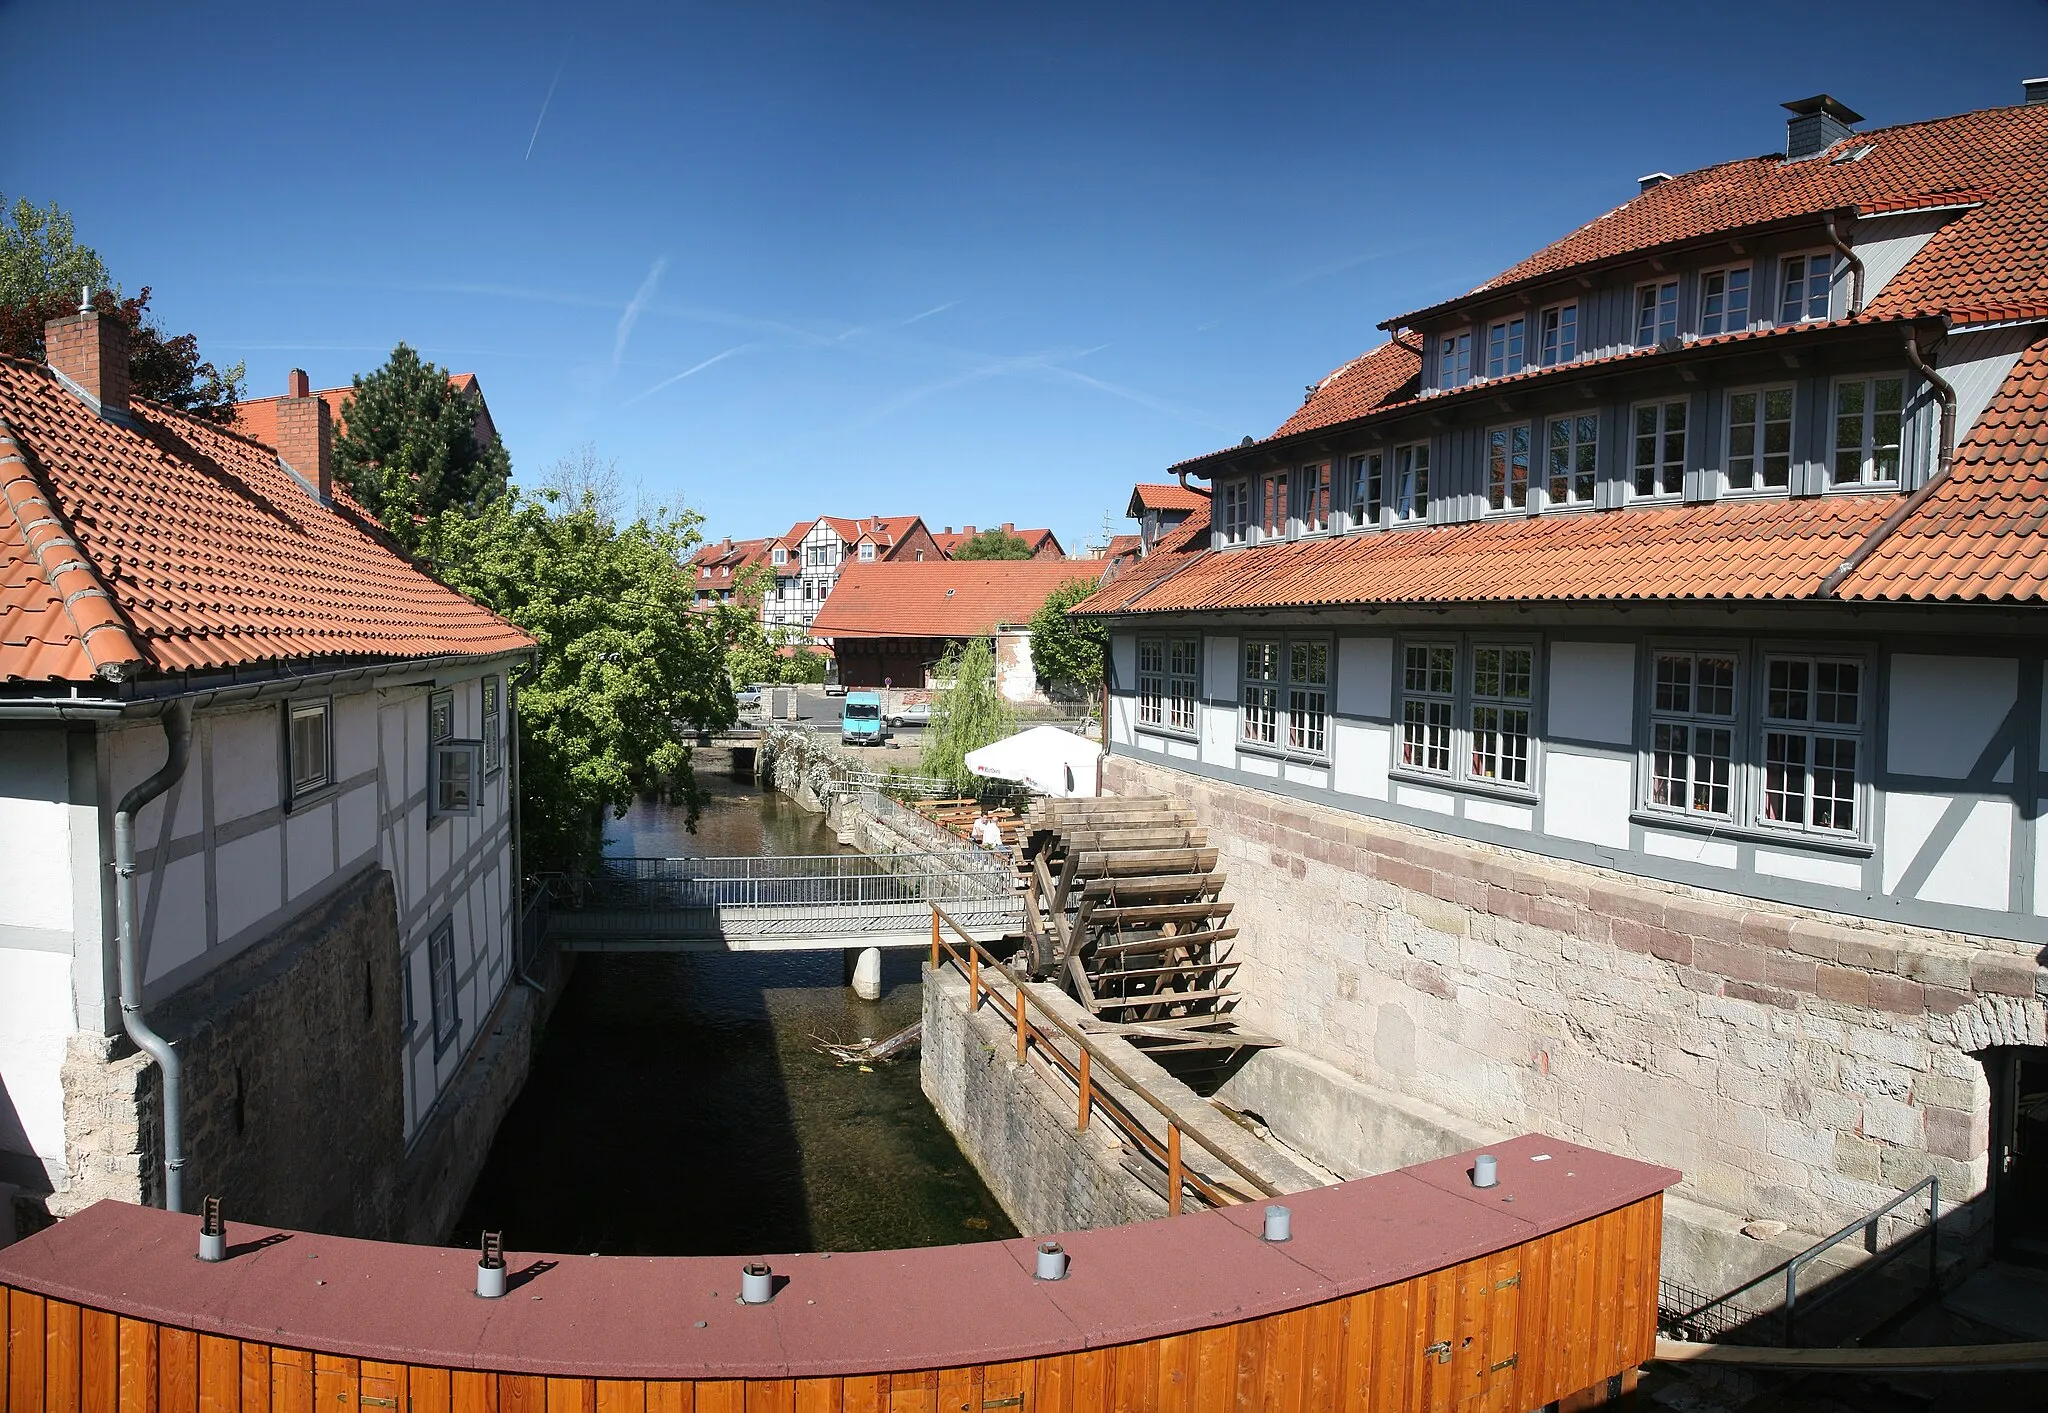 Photo showing: Lohmuehle and Odilienmühle, historic water mills, Göttingen, Germany